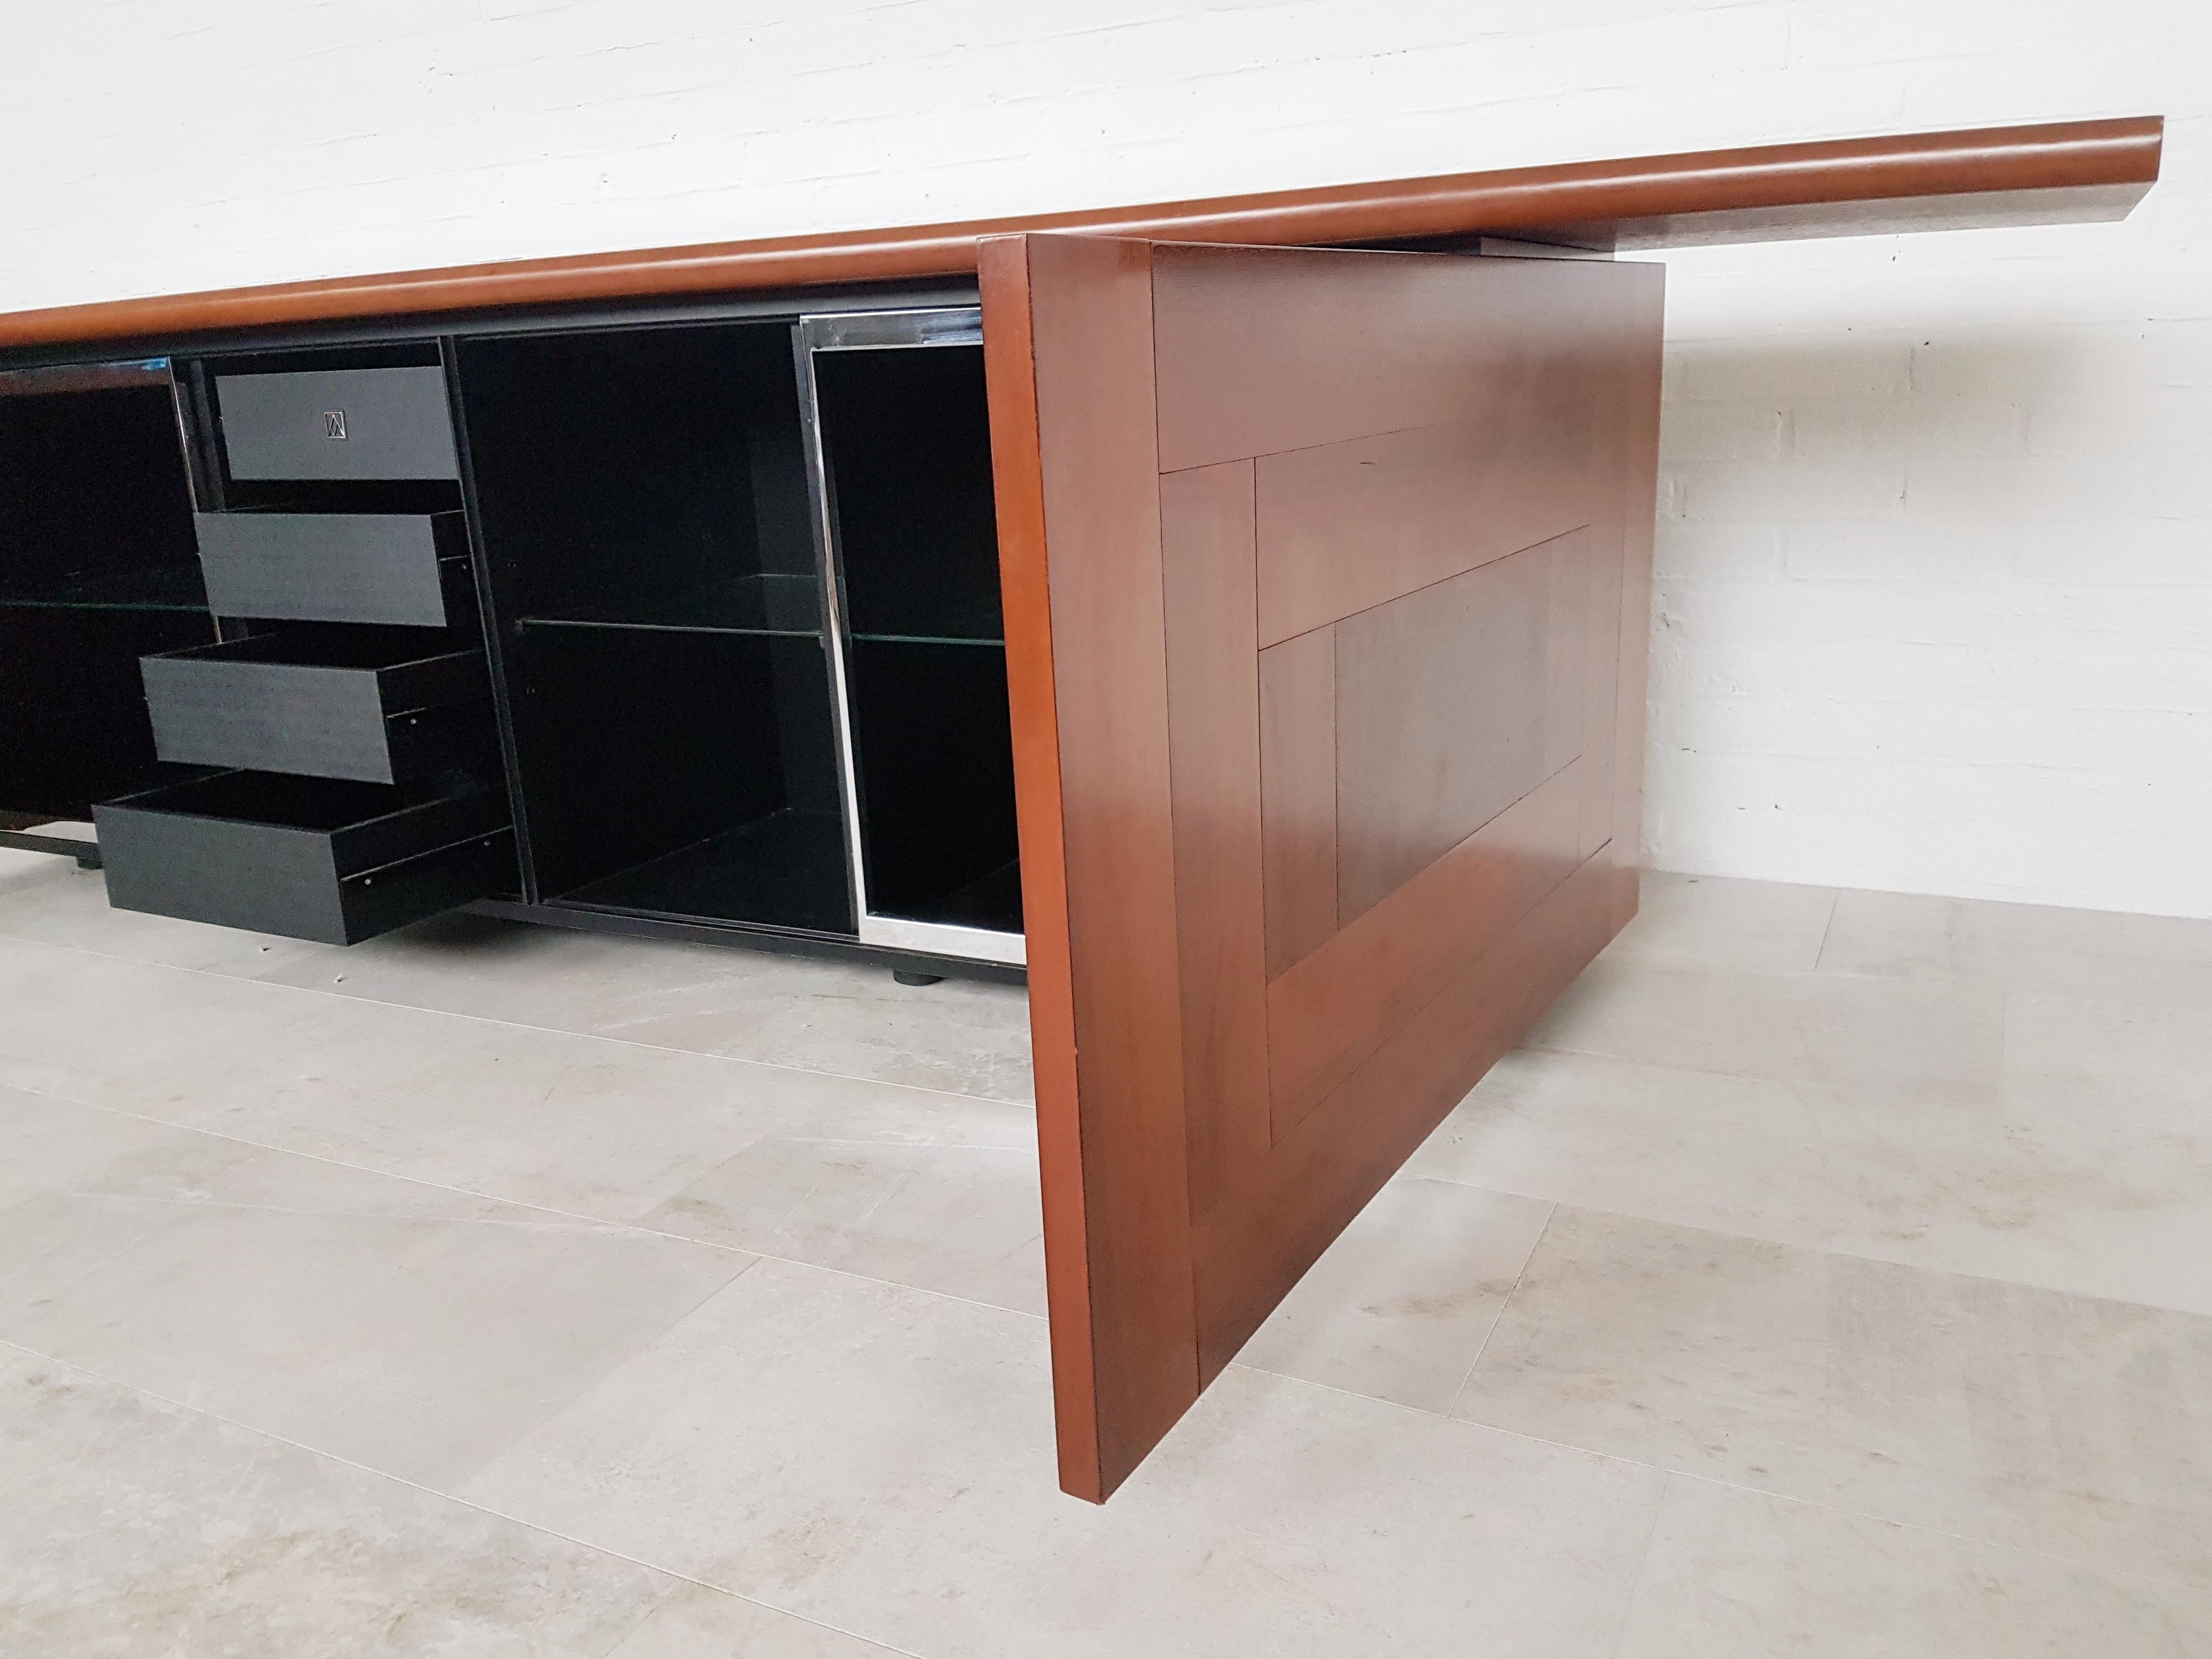 Acerbis Sheraton Post-Modern Sideboard by Giotto Stoppino (Kirsche)